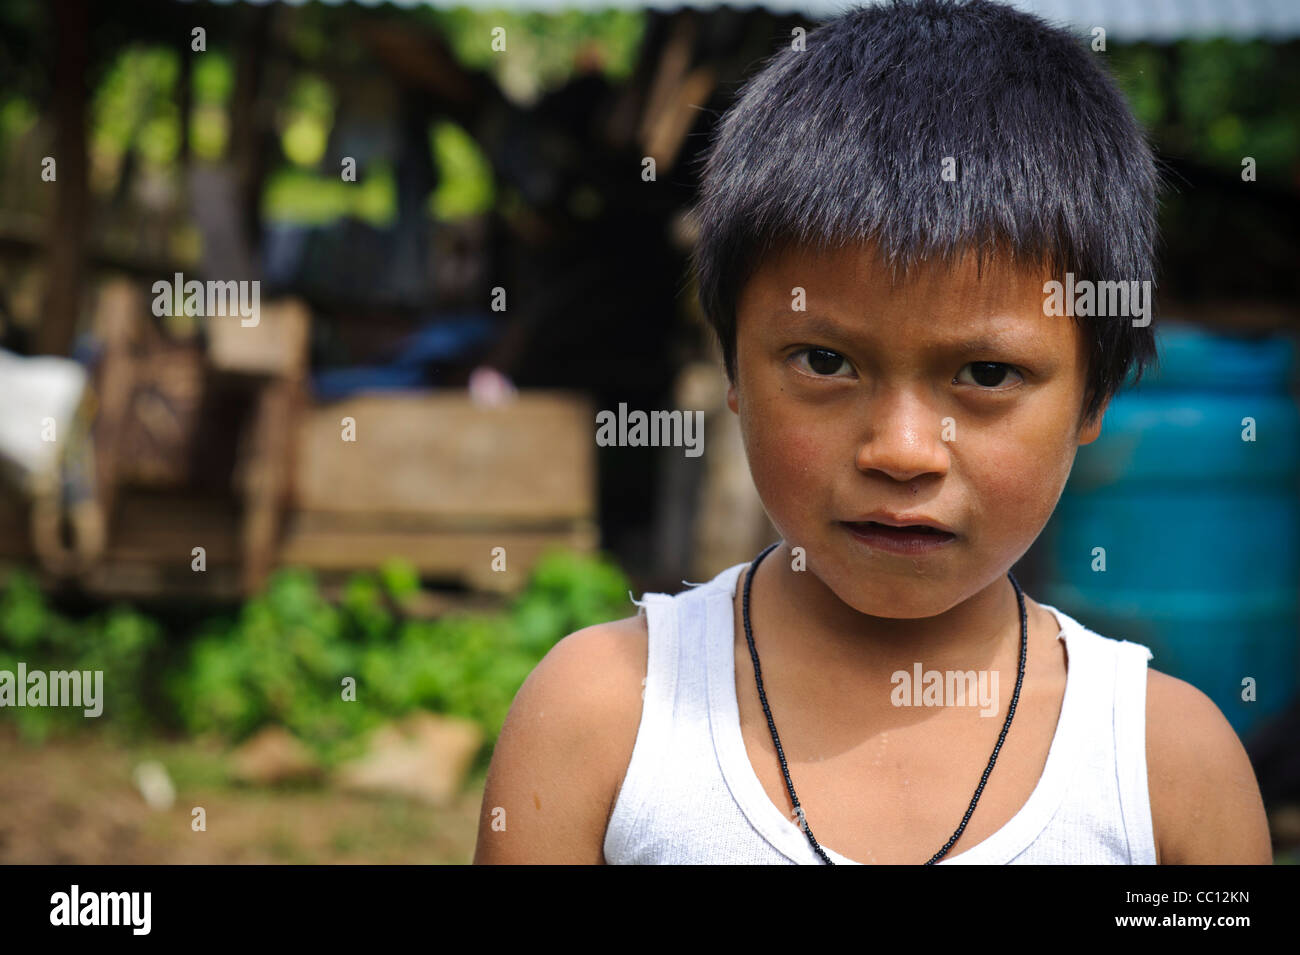 Young boy not smiling in Honduras Stock Photo - Alamy